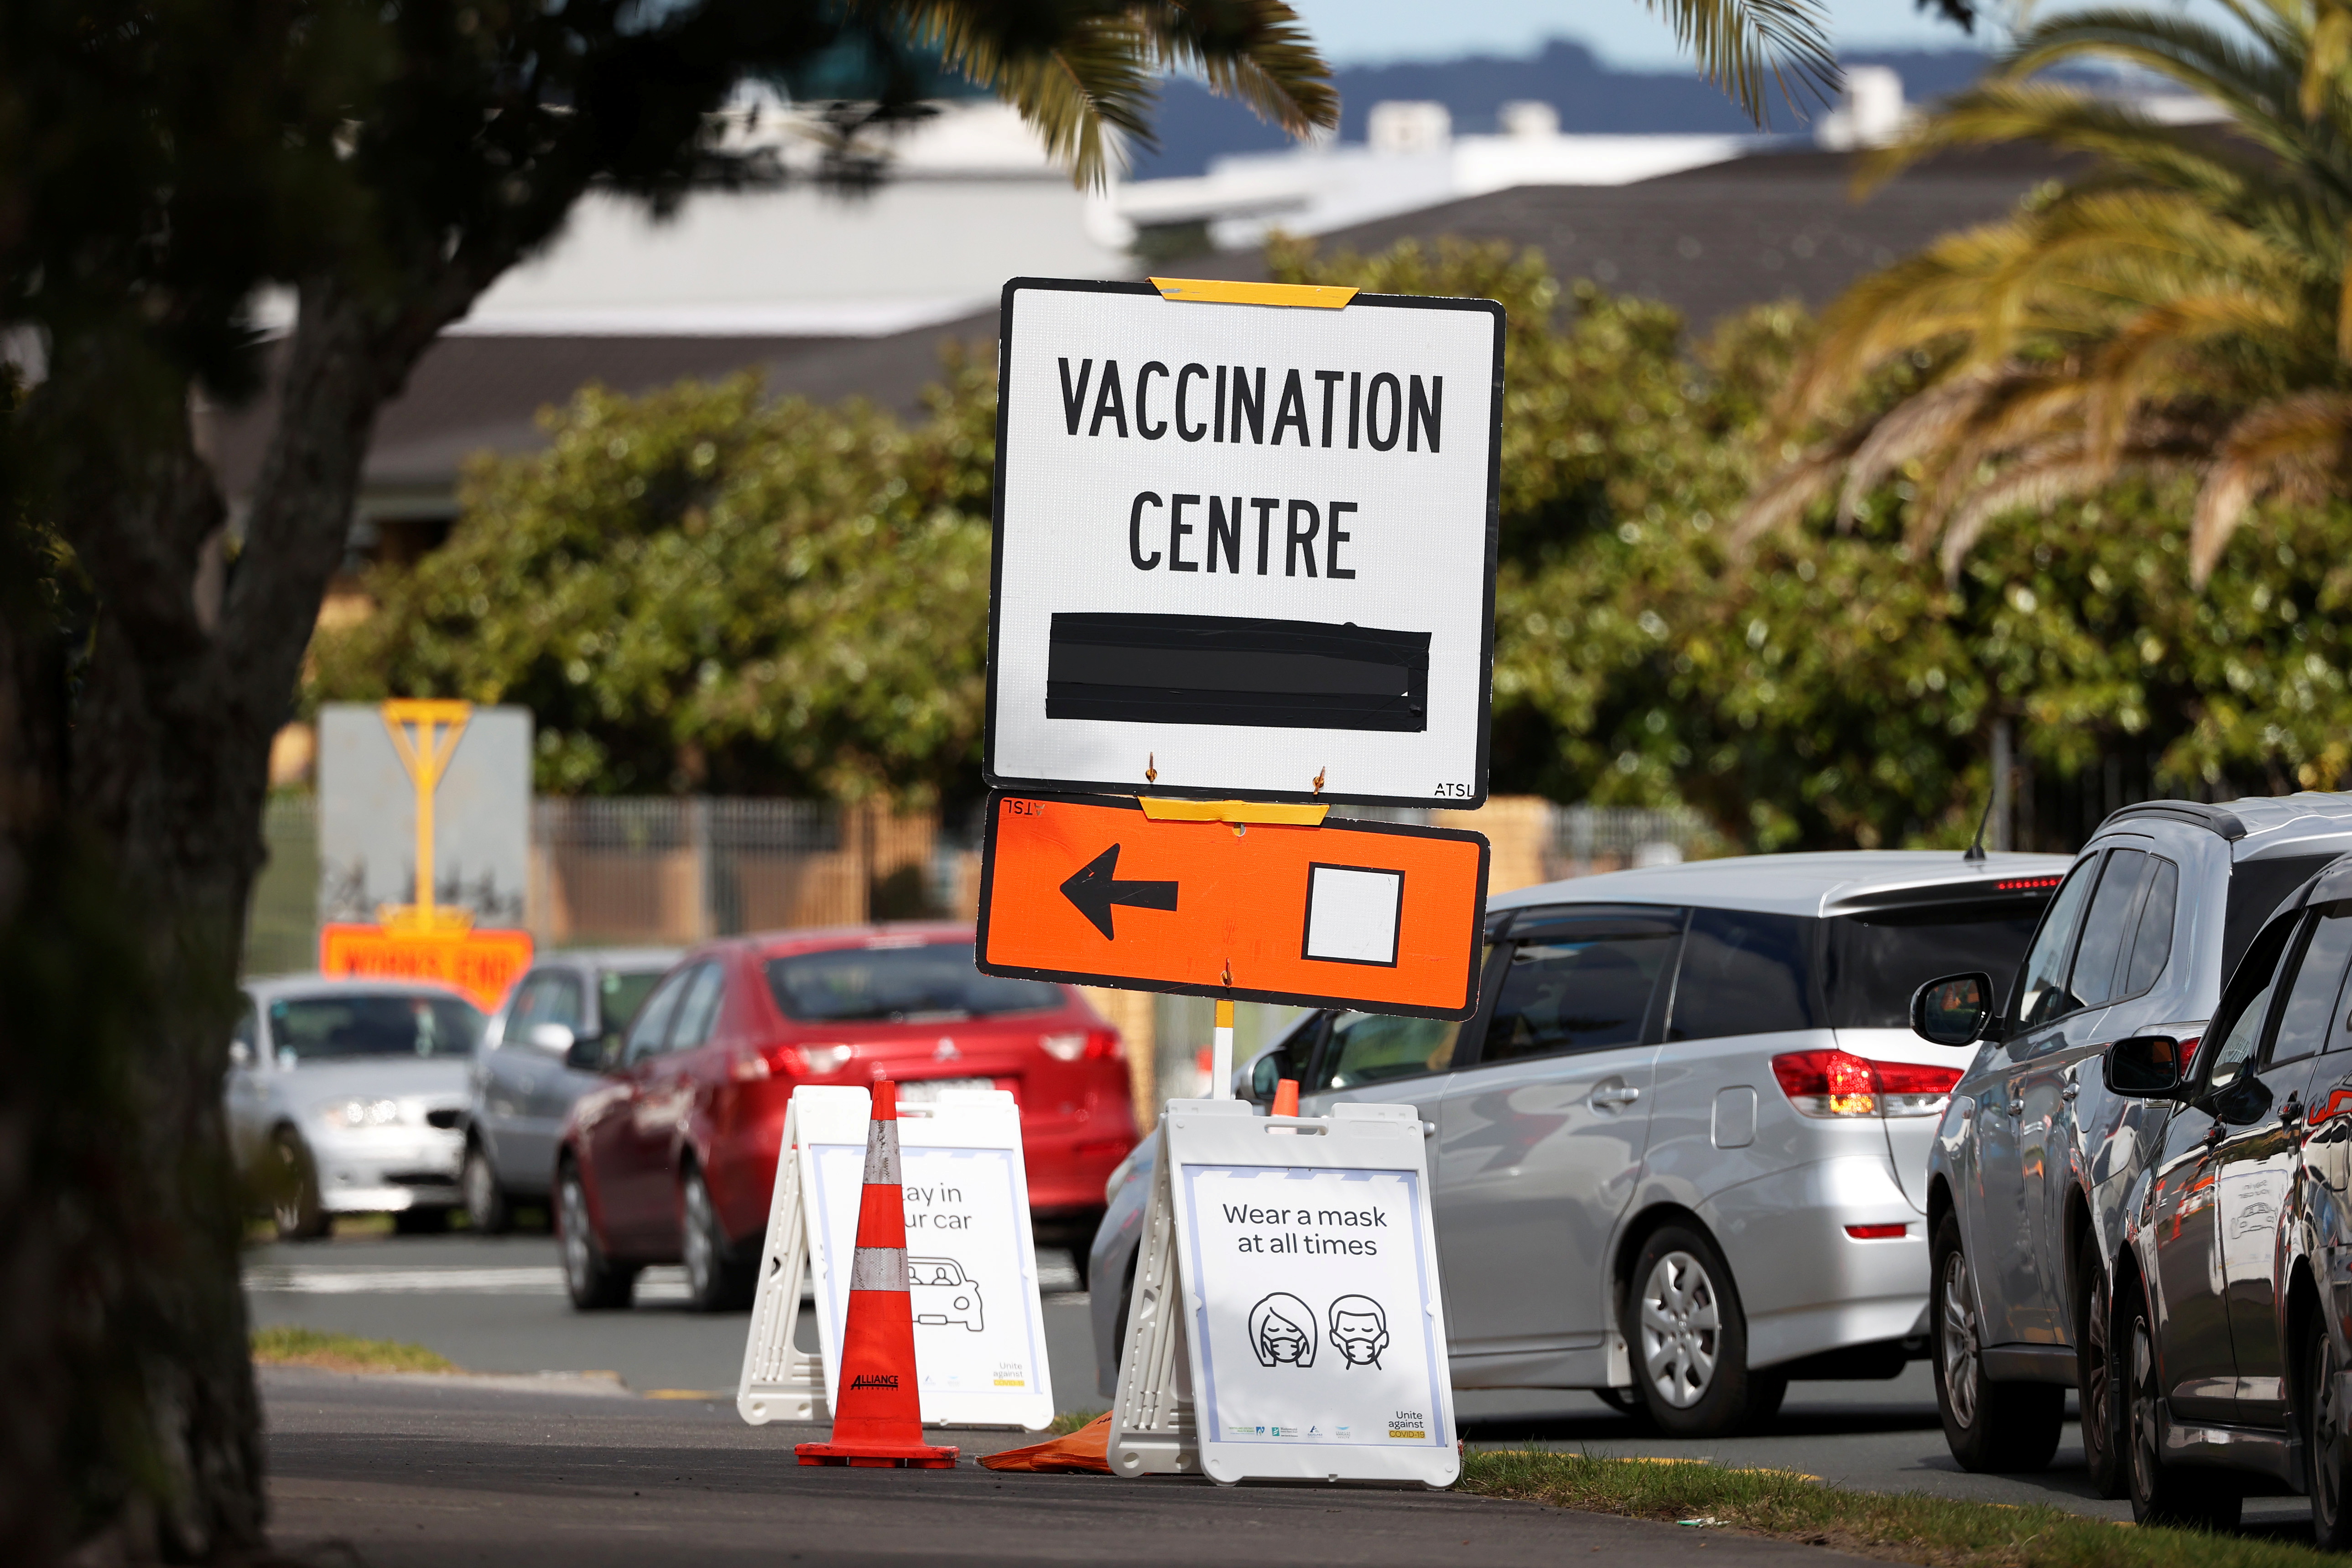 A COVID-19 lockdown remains in place as an outbreak of cases affects New Zealand